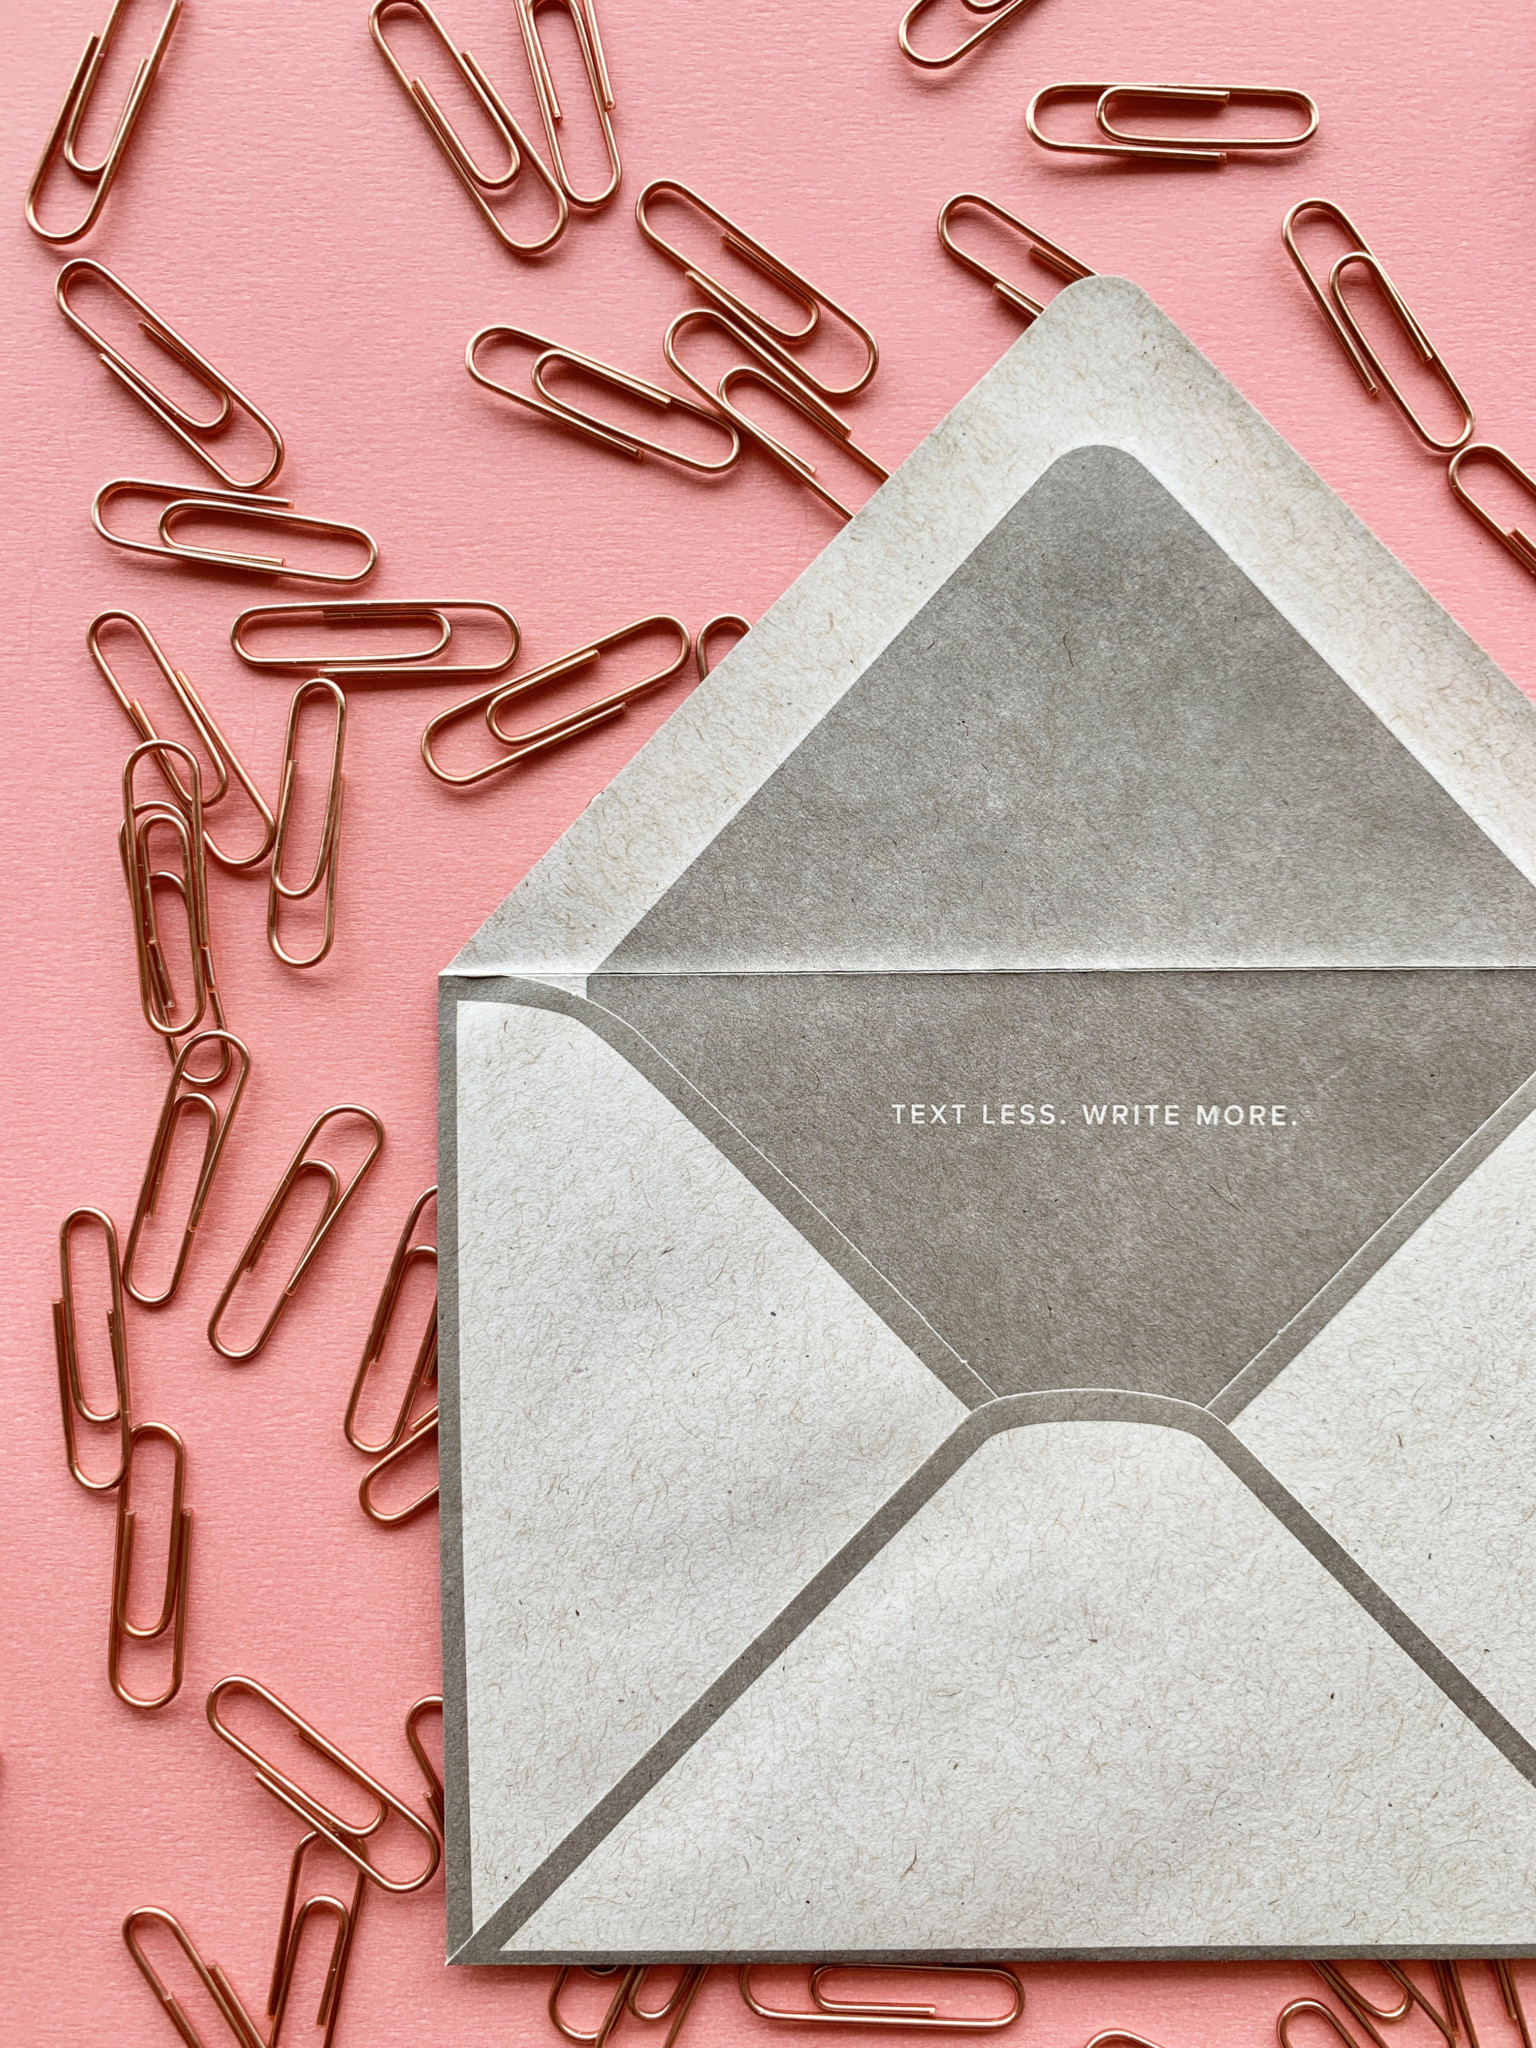 INK MEETS PAPER® Signature Envelope on a pink paper background surrounded by gold paper clips